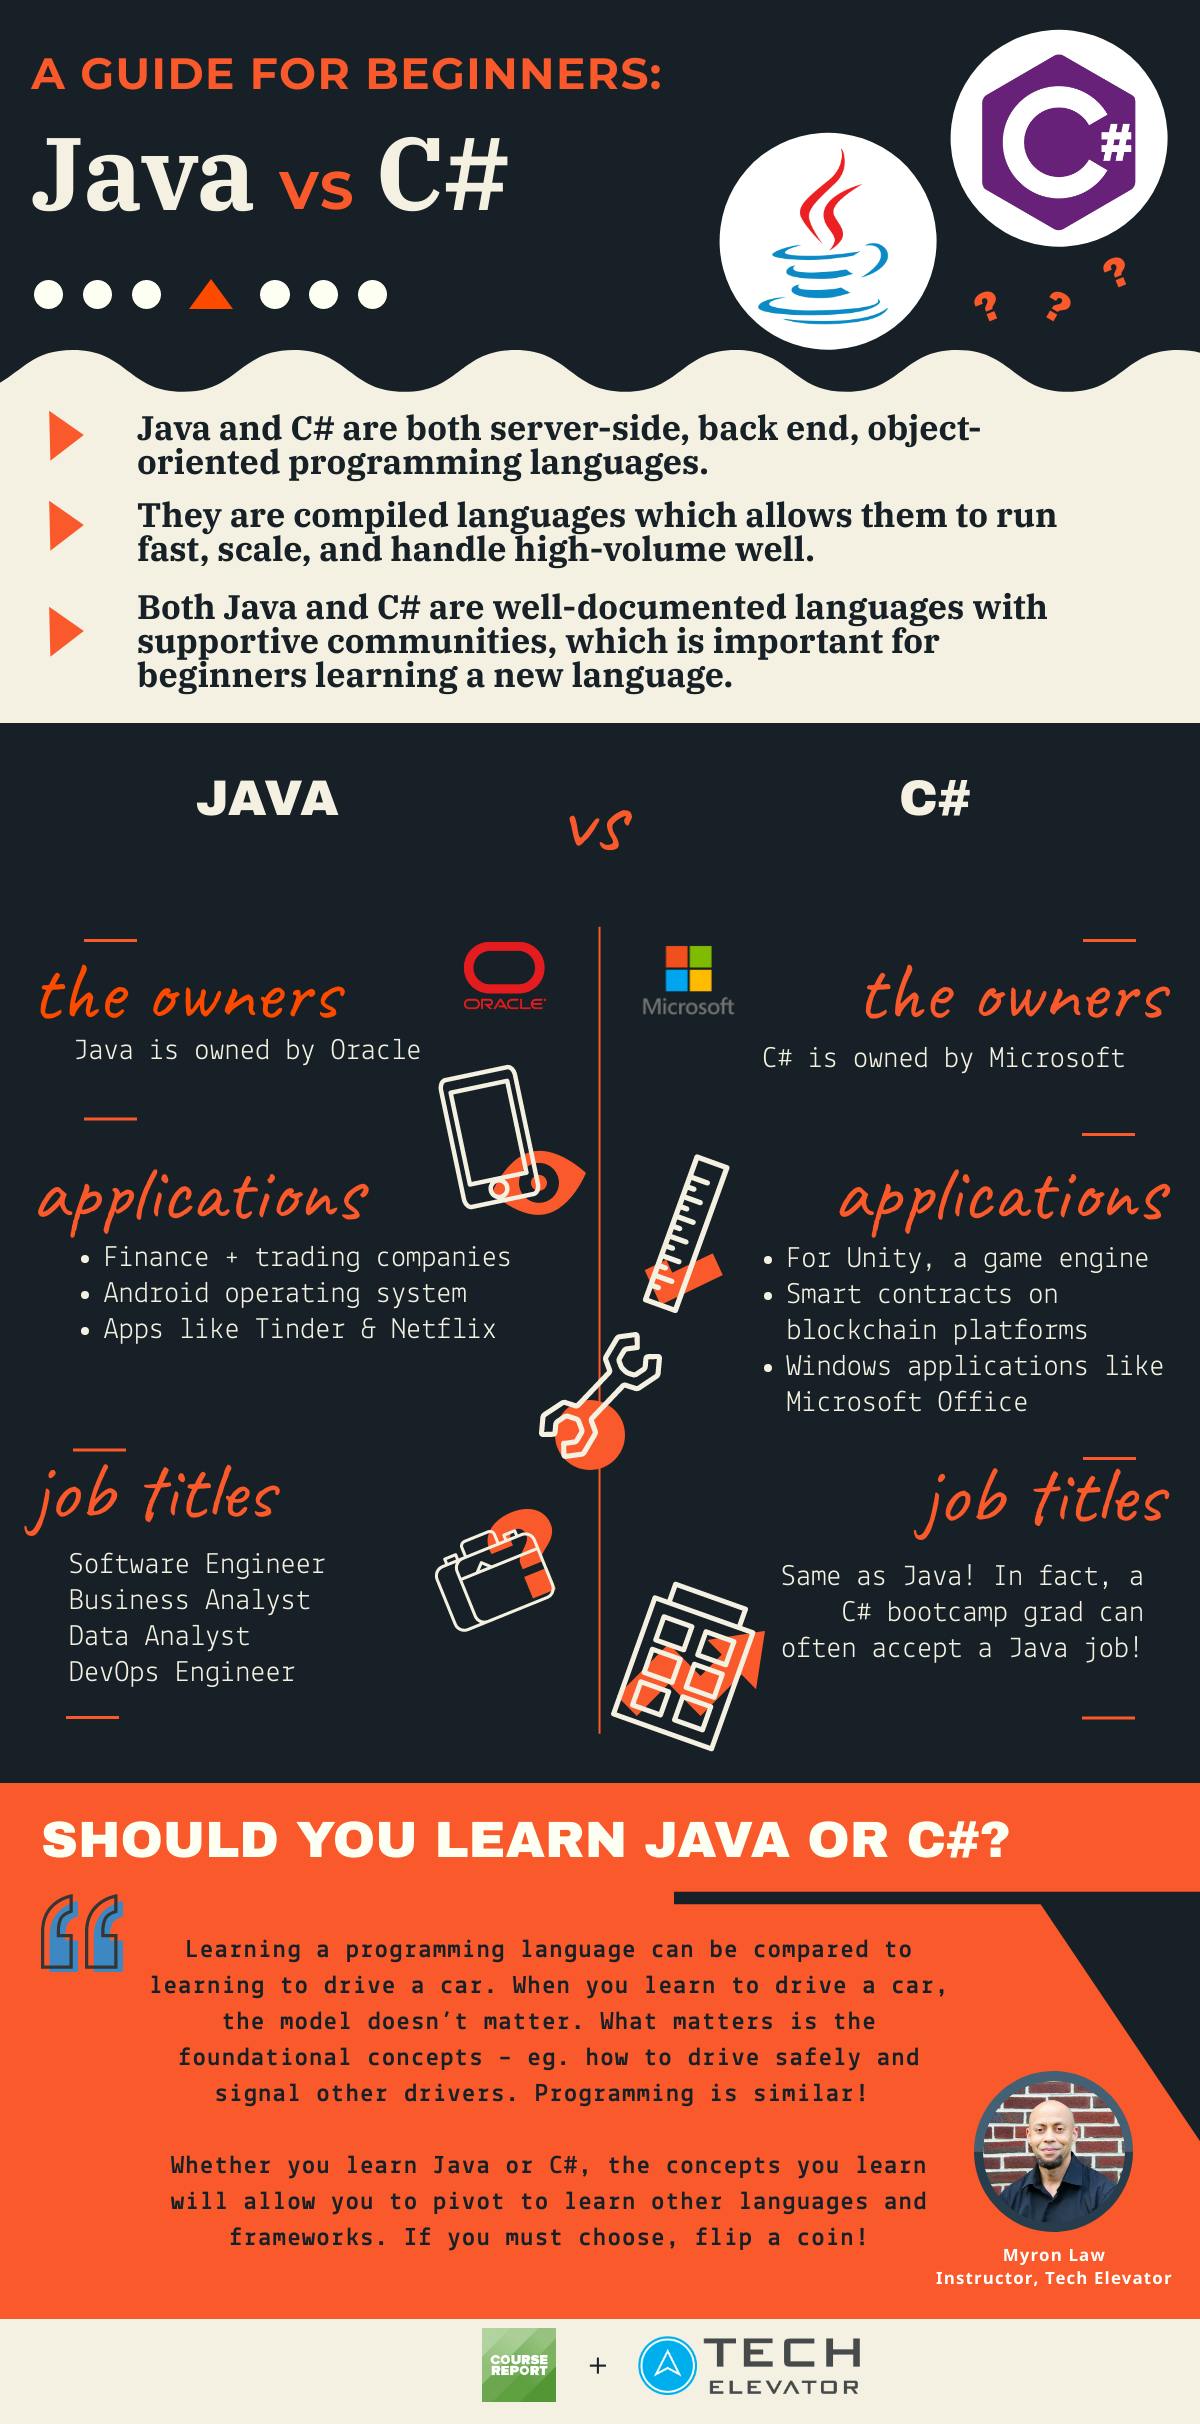 Should I learn Java or C#?